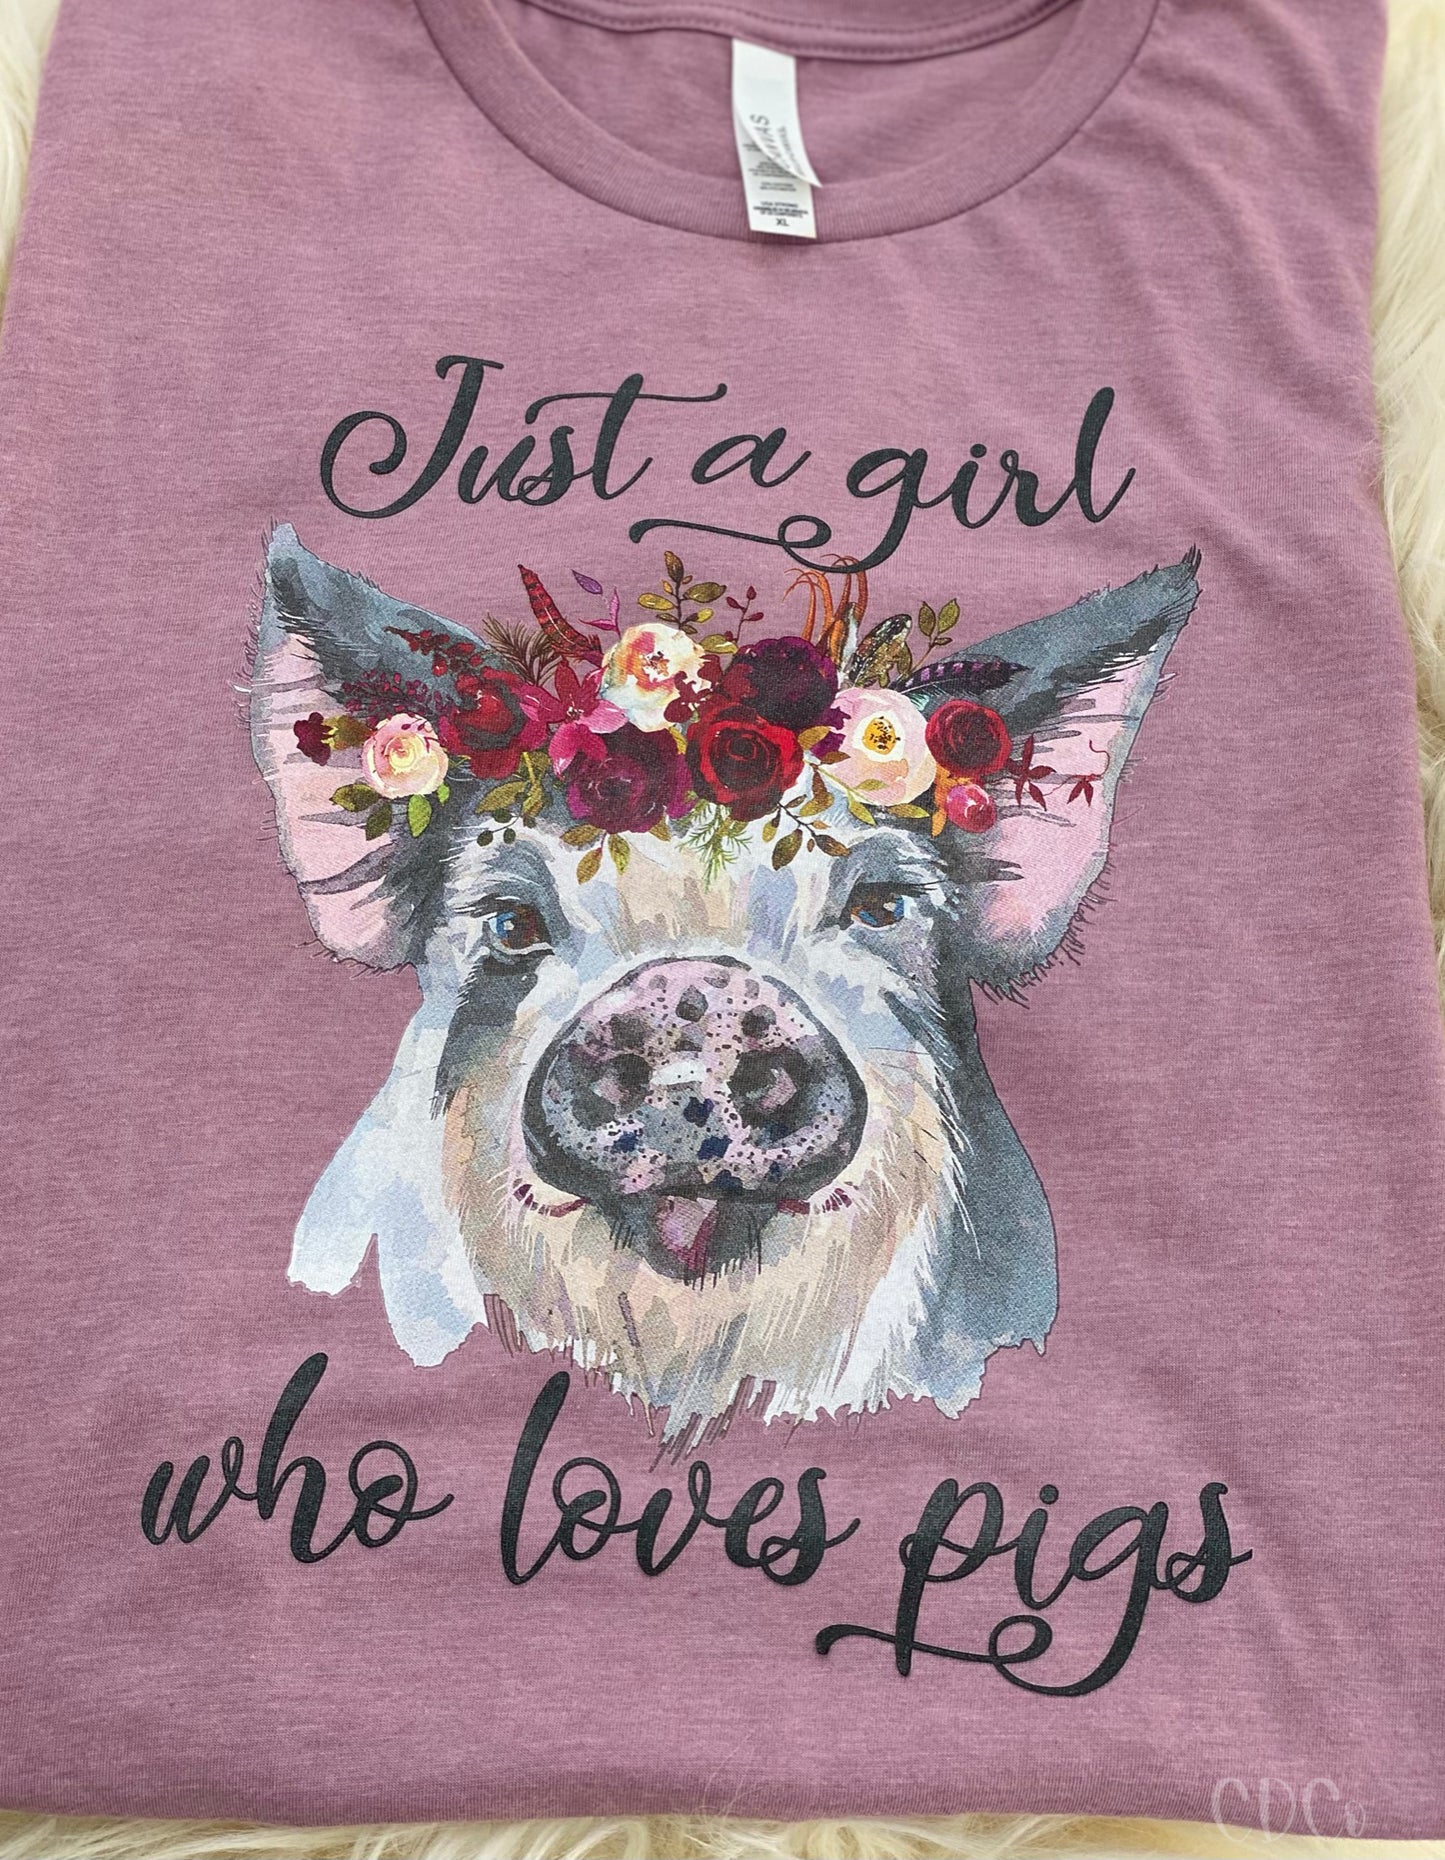 Just a Girl Who Loves Pigs (350°-375°)